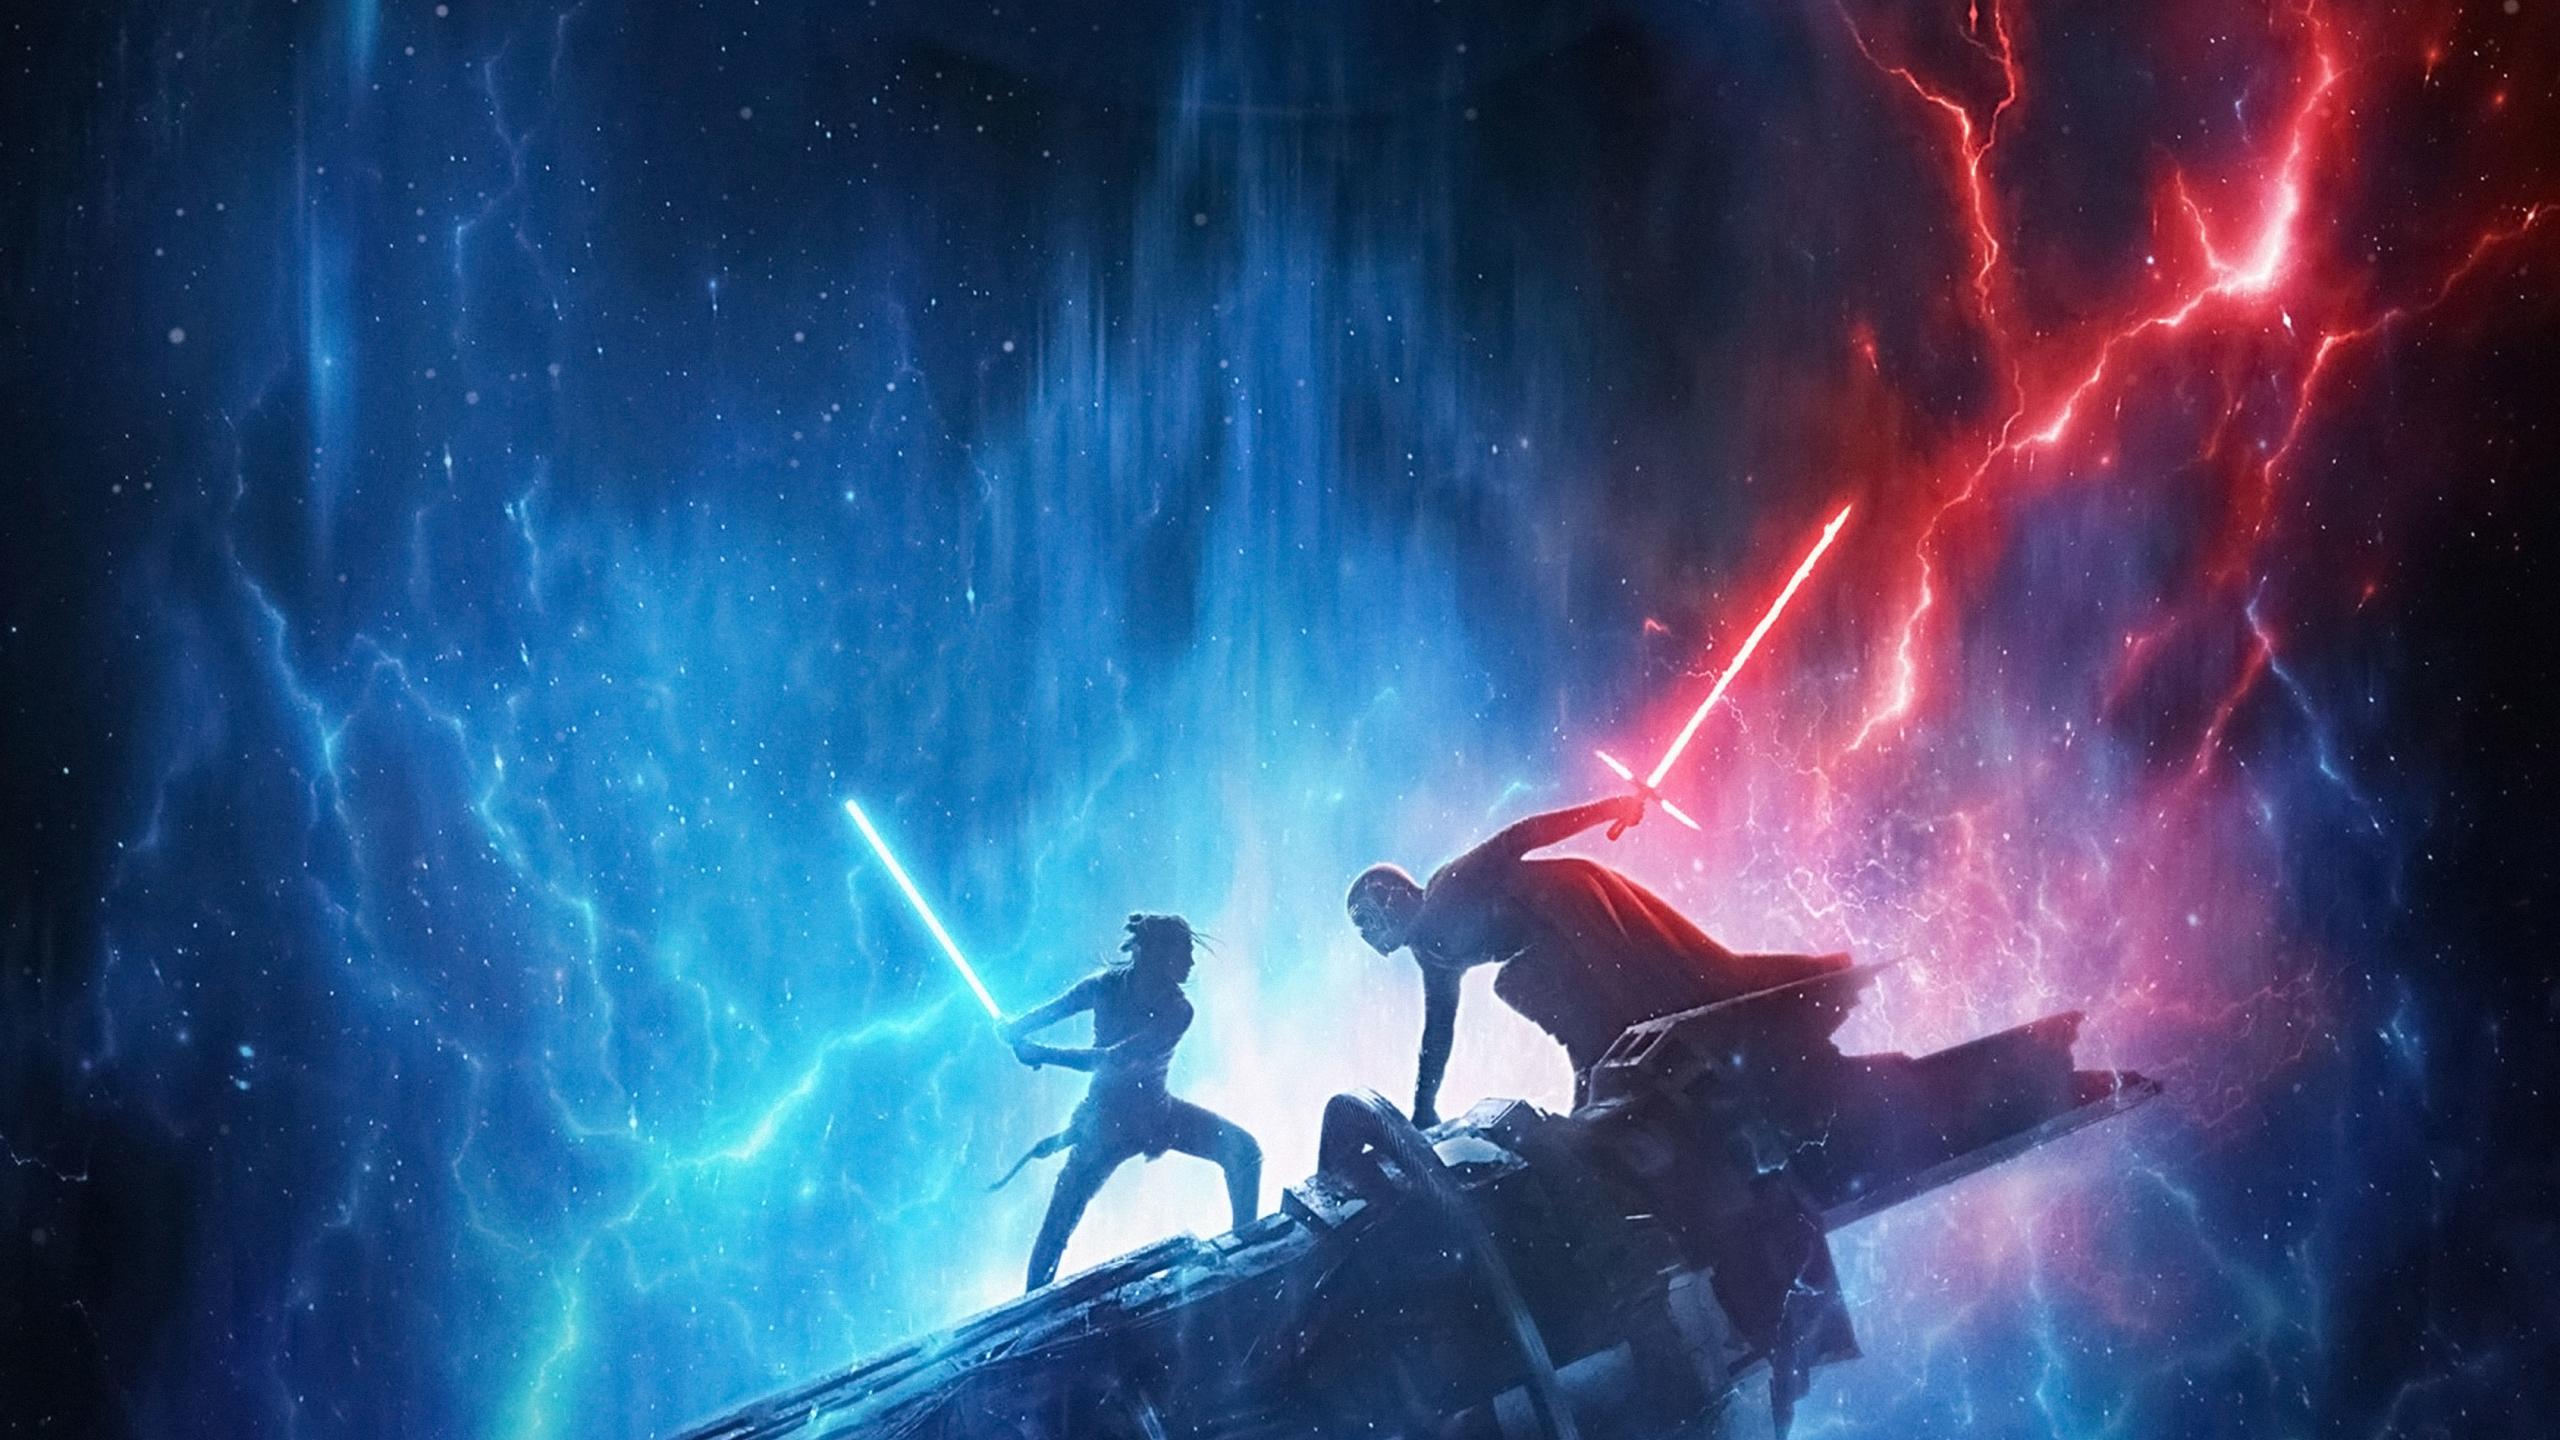 Star Wars The Rise Of Skywalker 1440P Resolution Wallpaper, HD Movies 4K Wallpaper, Image, Photo and Background